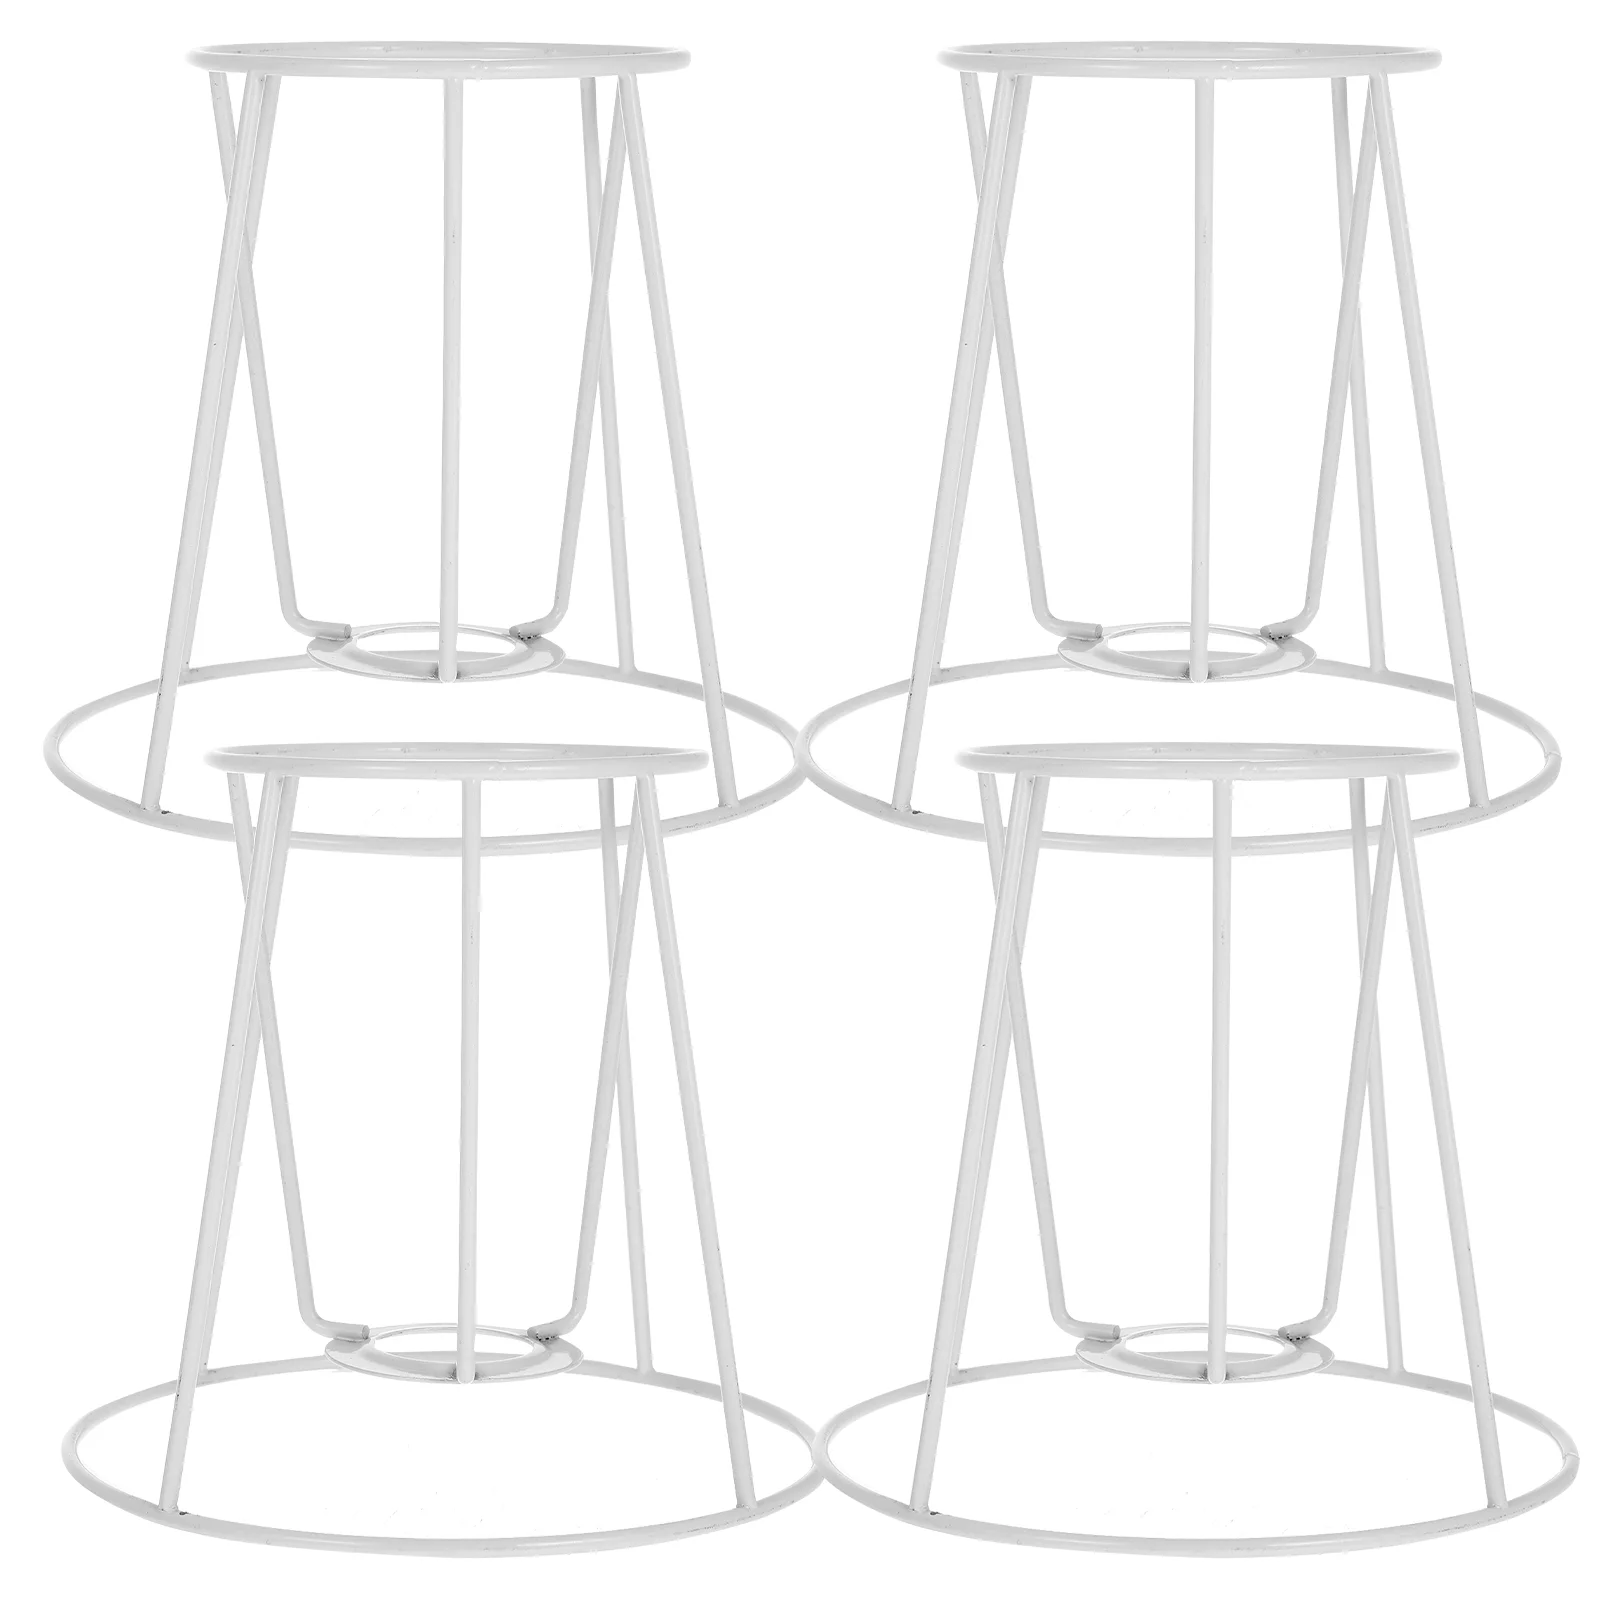 4 Pcs Outdoor Table Light Diy Lampshade Shelf Metal Lamp Ring Lamp Shade Ring Chandelier Light Cover Industrial Lamp Shade